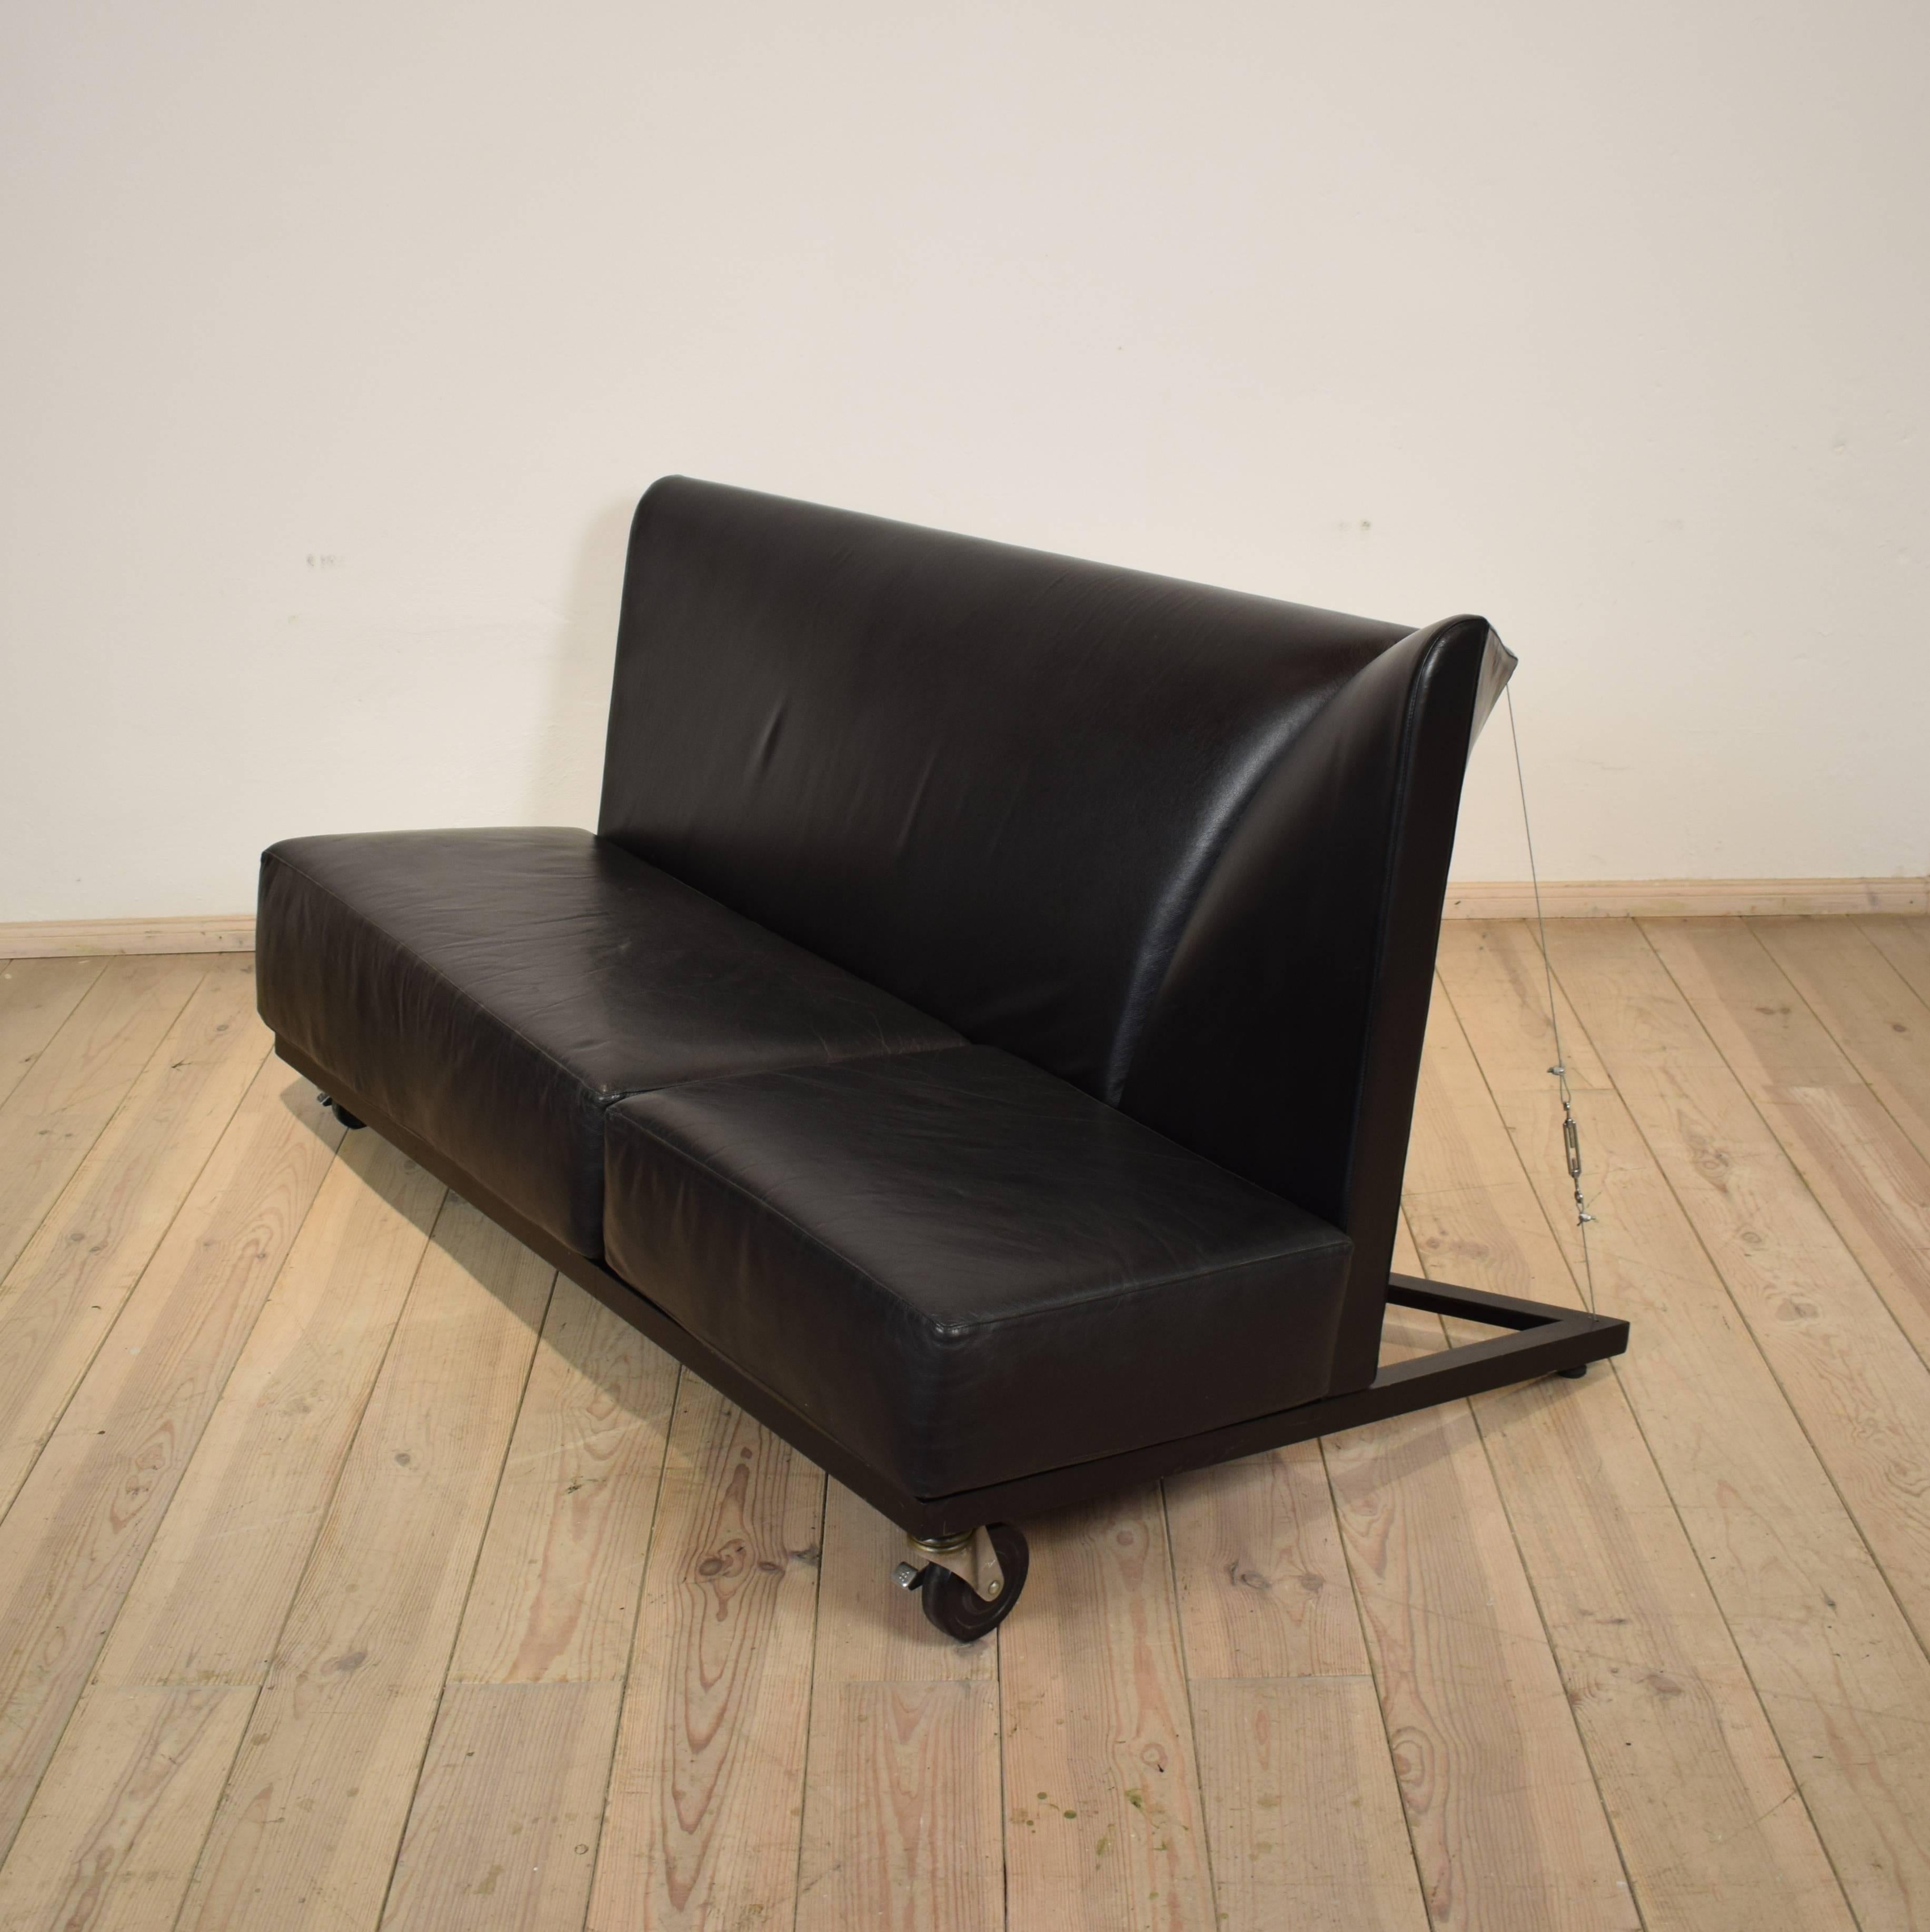 Late 20th Century Mid-Century Memphis Black Leather Sofa by Pallucco and Rivier for Pallucco, 1988